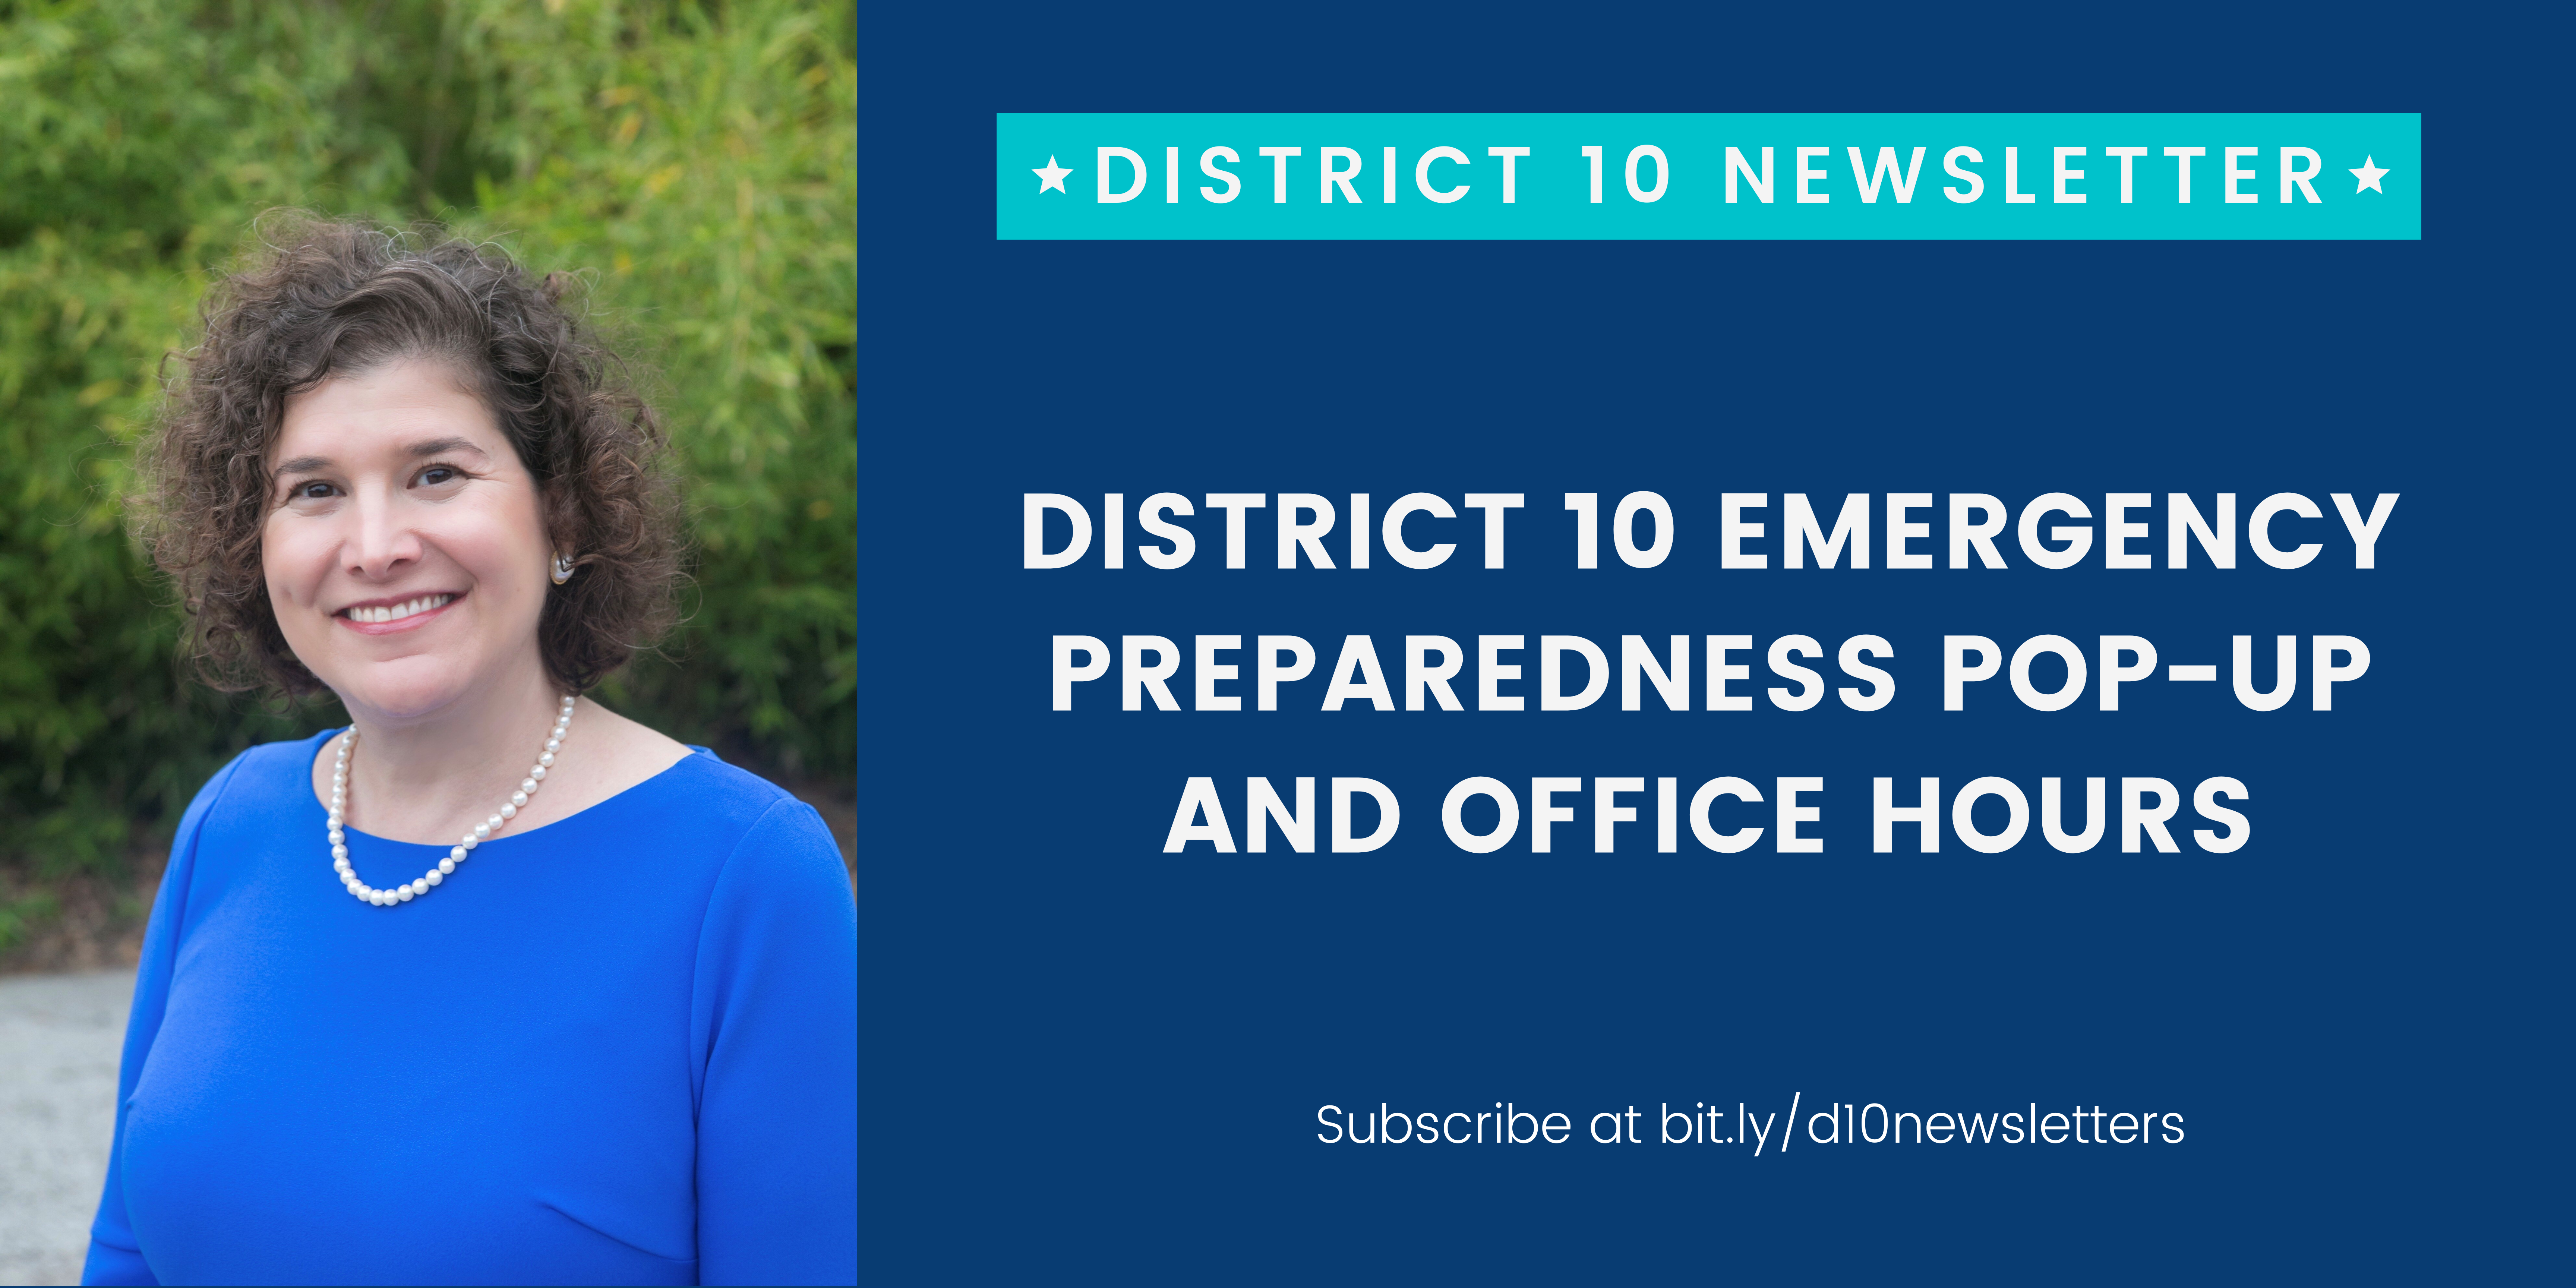 district 10 office hours and emergency preparedness pop-up for central/northwest austin